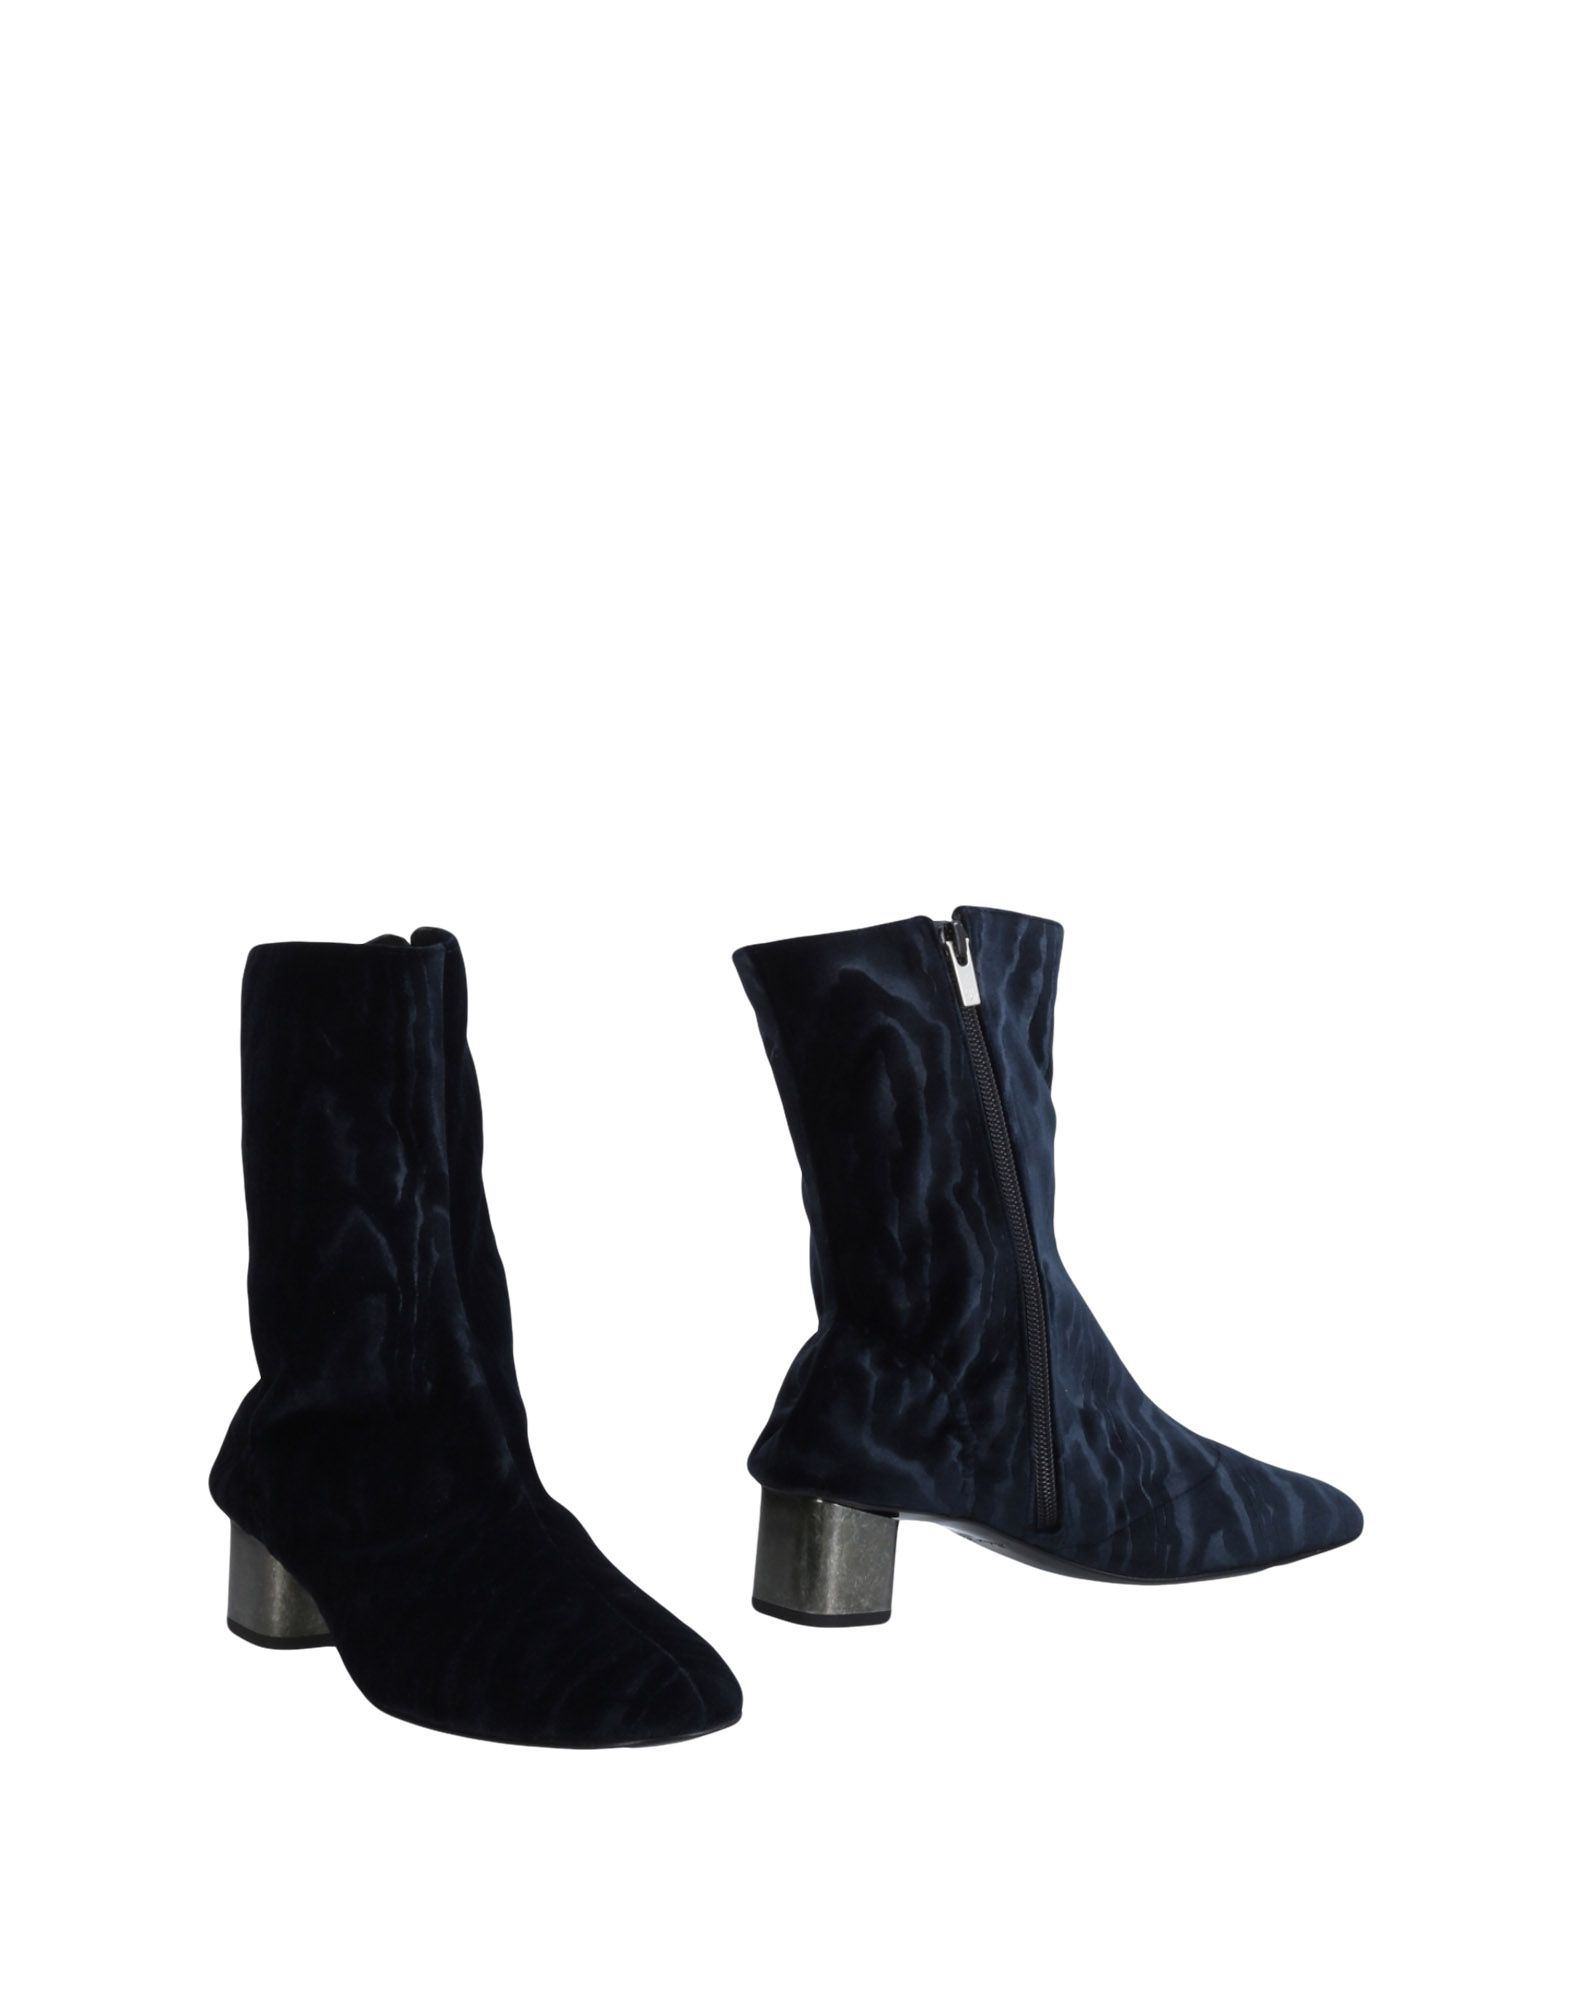 dressing gownRT CLERGERIE Ankle boot,11454130WC 7